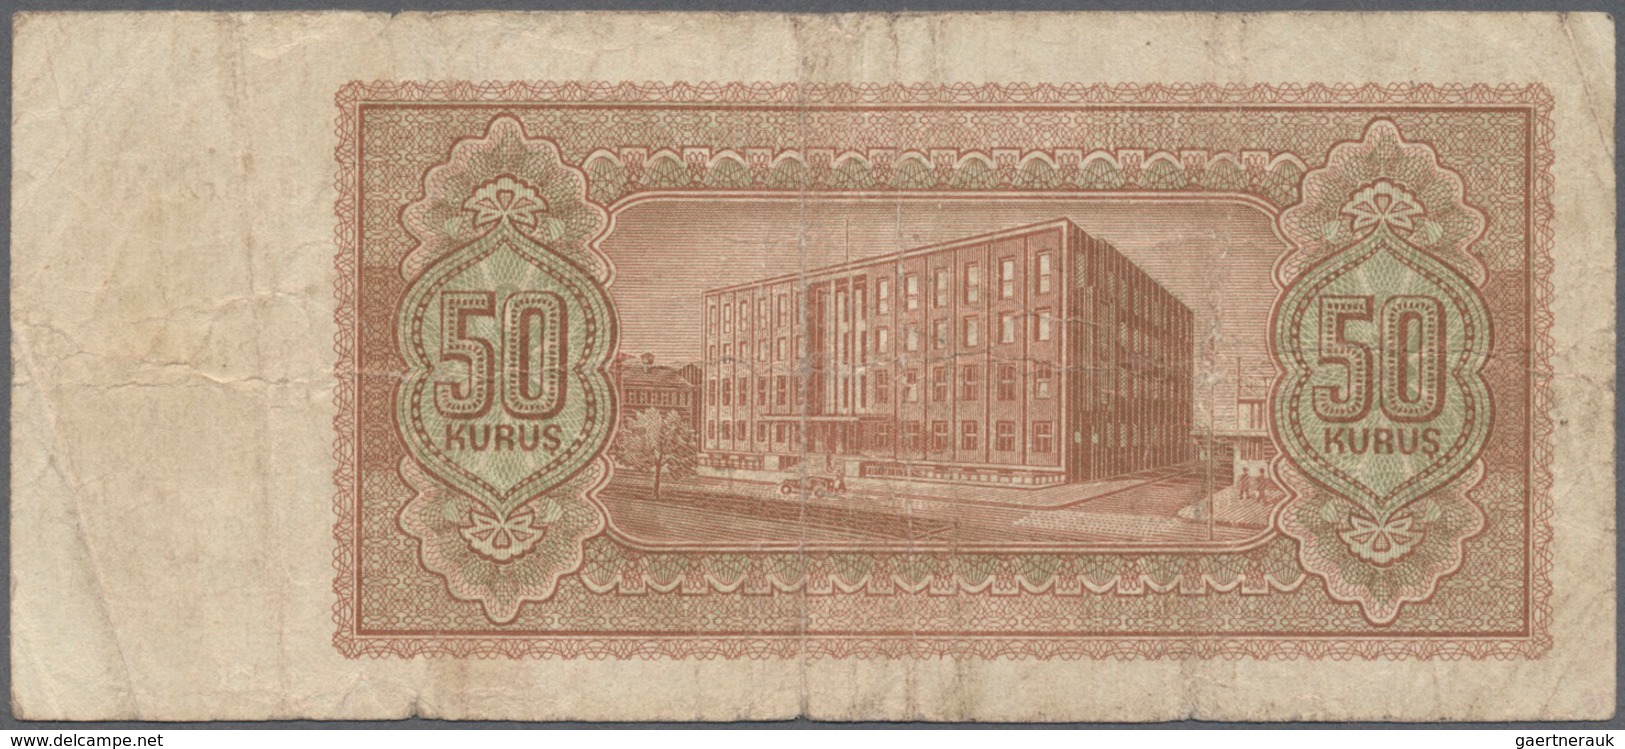 02528 Turkey / Türkei: 50 Kurus ND(1944) P. 134, Used With Several Folds And Staining In Paper, No Holes O - Turkey